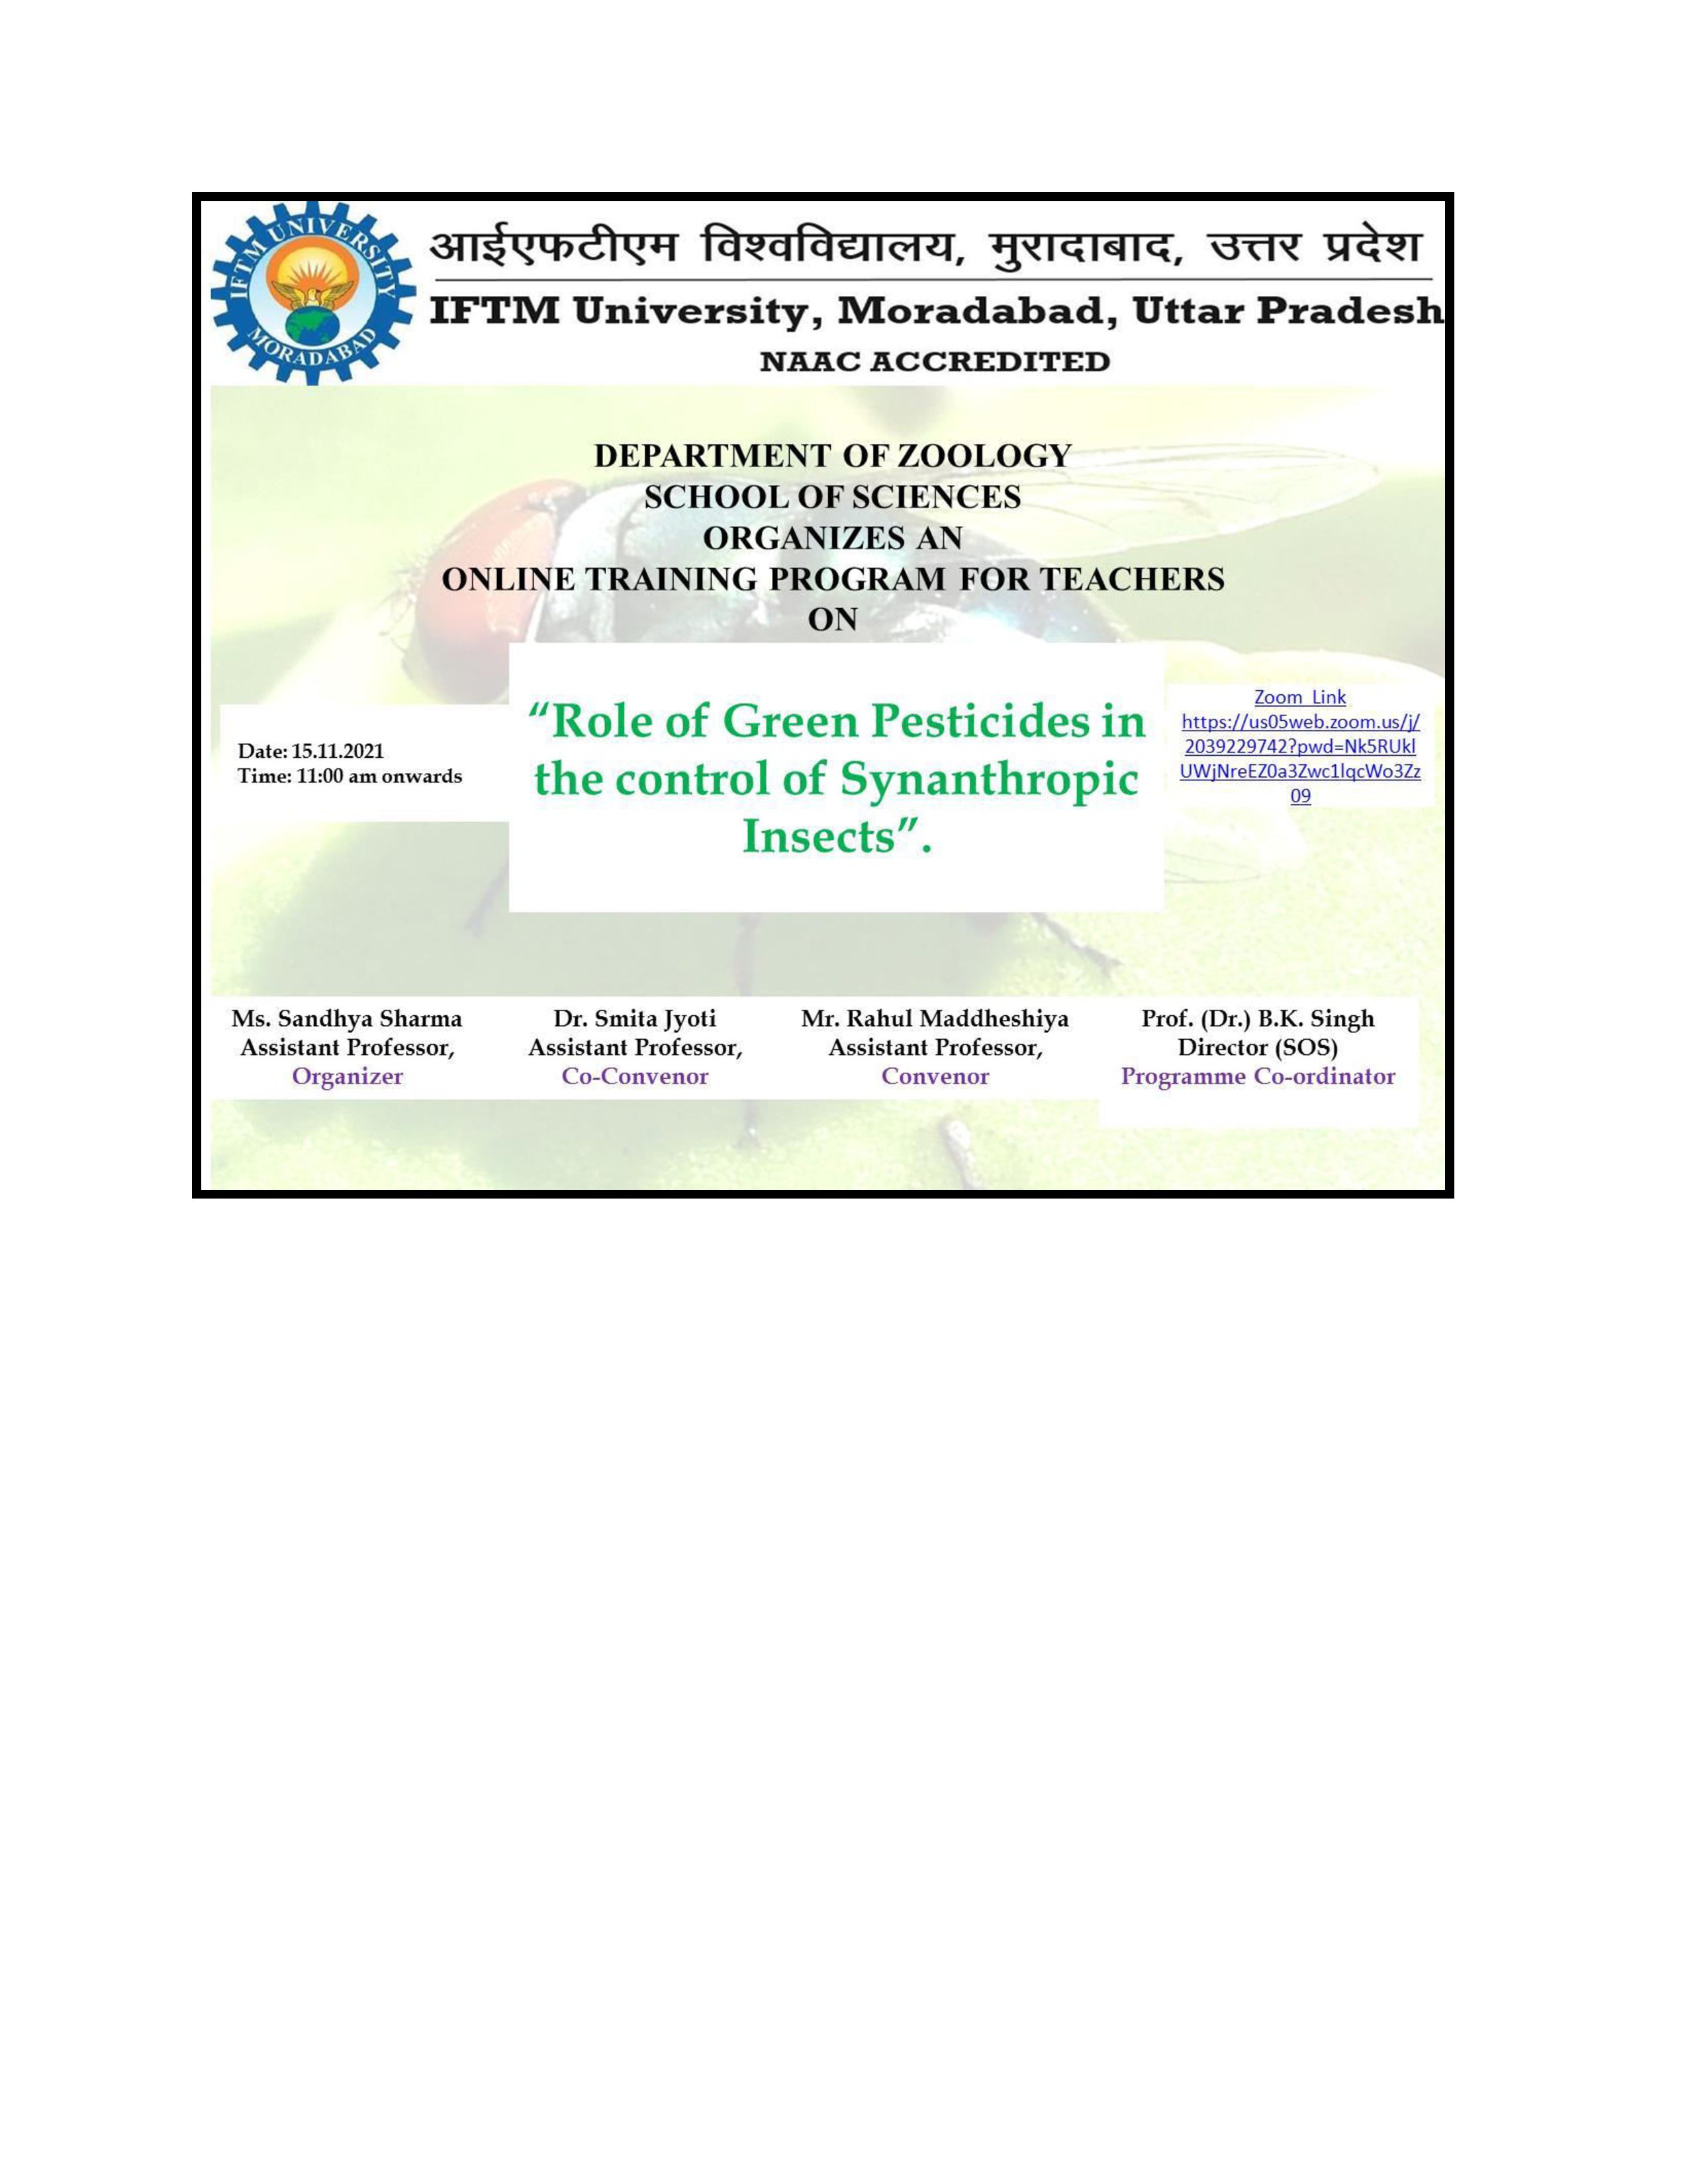 OnlineTraining Programme on Role of Green Pesticides for the control of Synanthropic insect